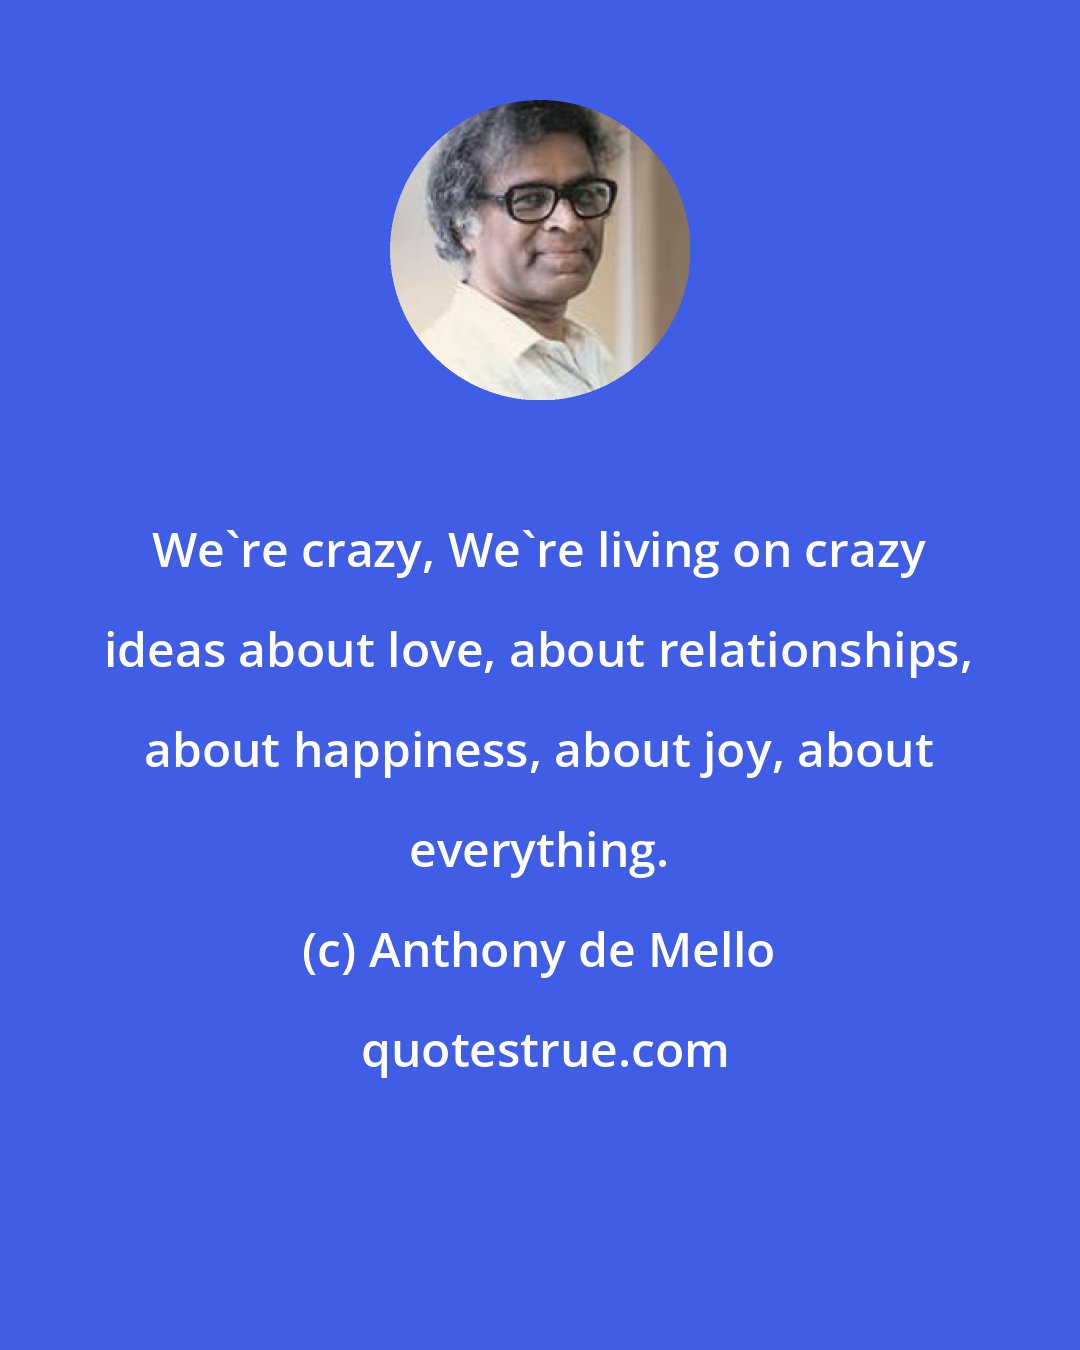 Anthony de Mello: We're crazy, We're living on crazy ideas about love, about relationships, about happiness, about joy, about everything.